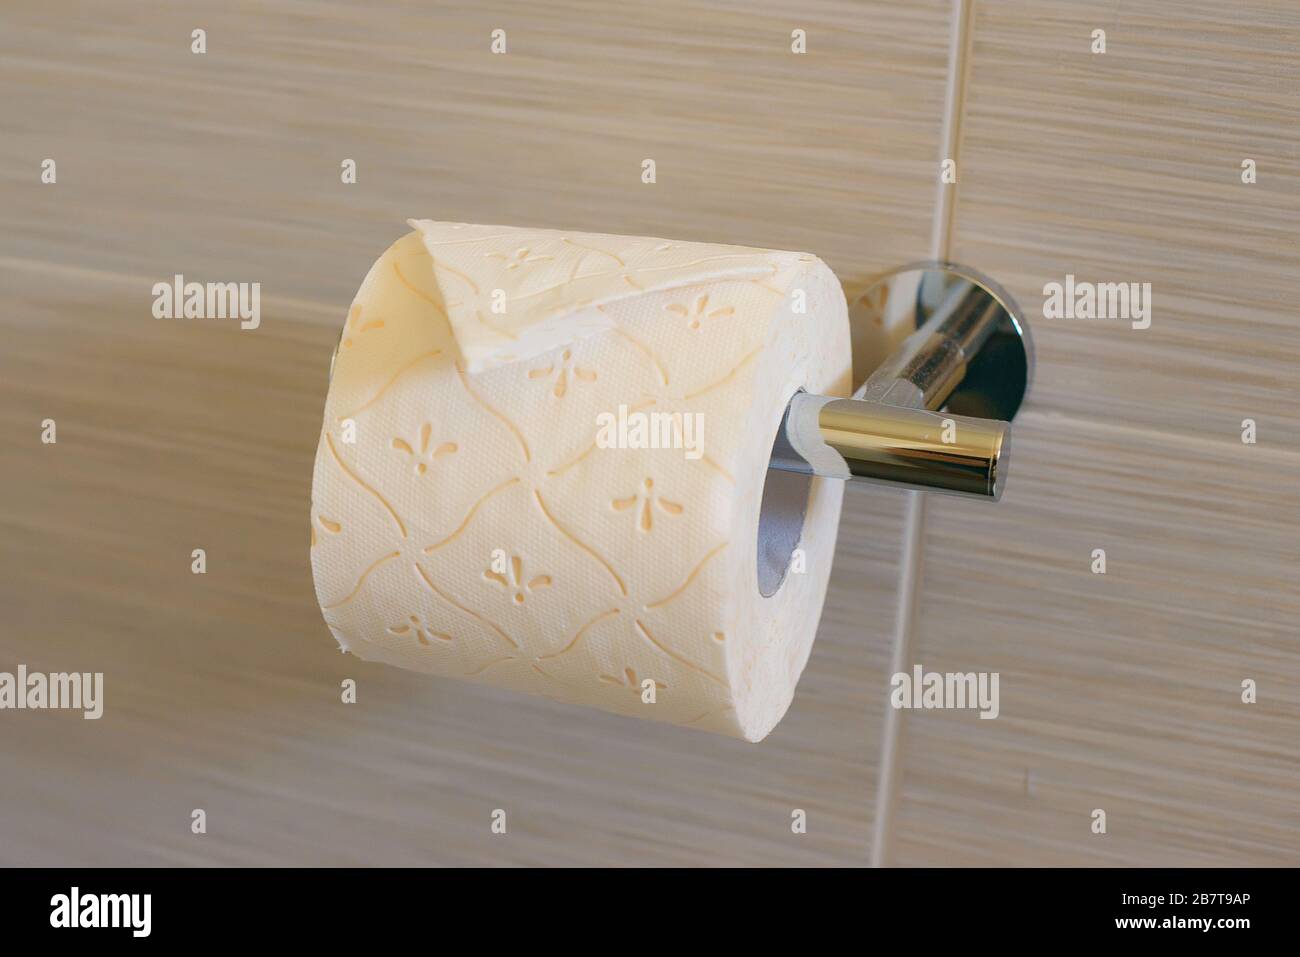 Toilet paper roll with over orientation and fold, set on a metallic holder or a bathroom tissue dispenser against a neutral tiled wall Stock Photo